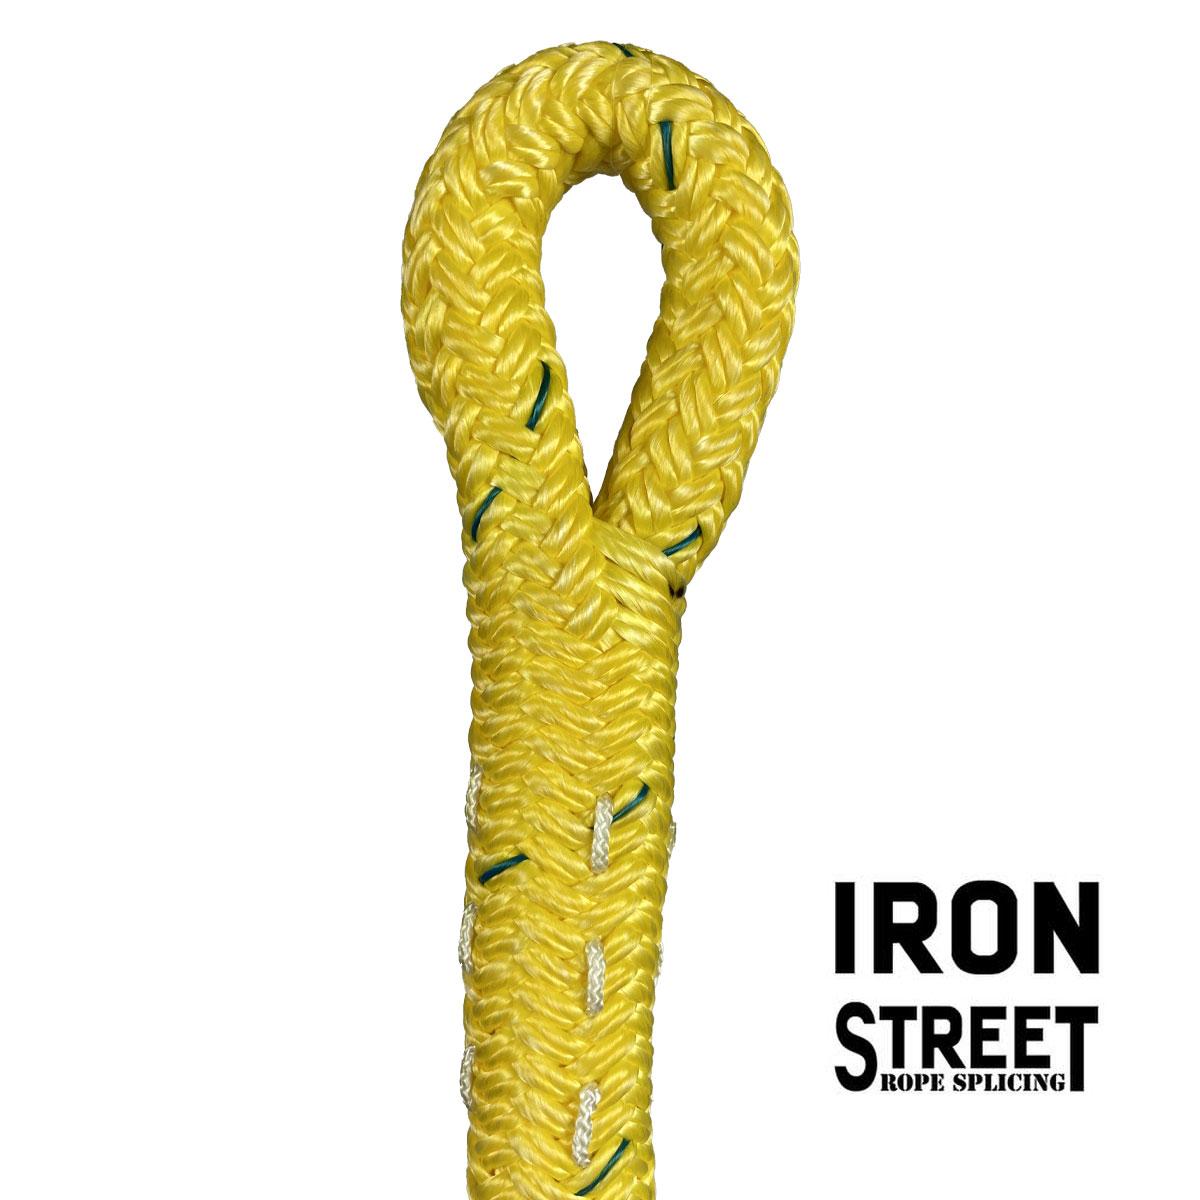 Professional Rope Splicing provided by Iron Street Rope Splicing